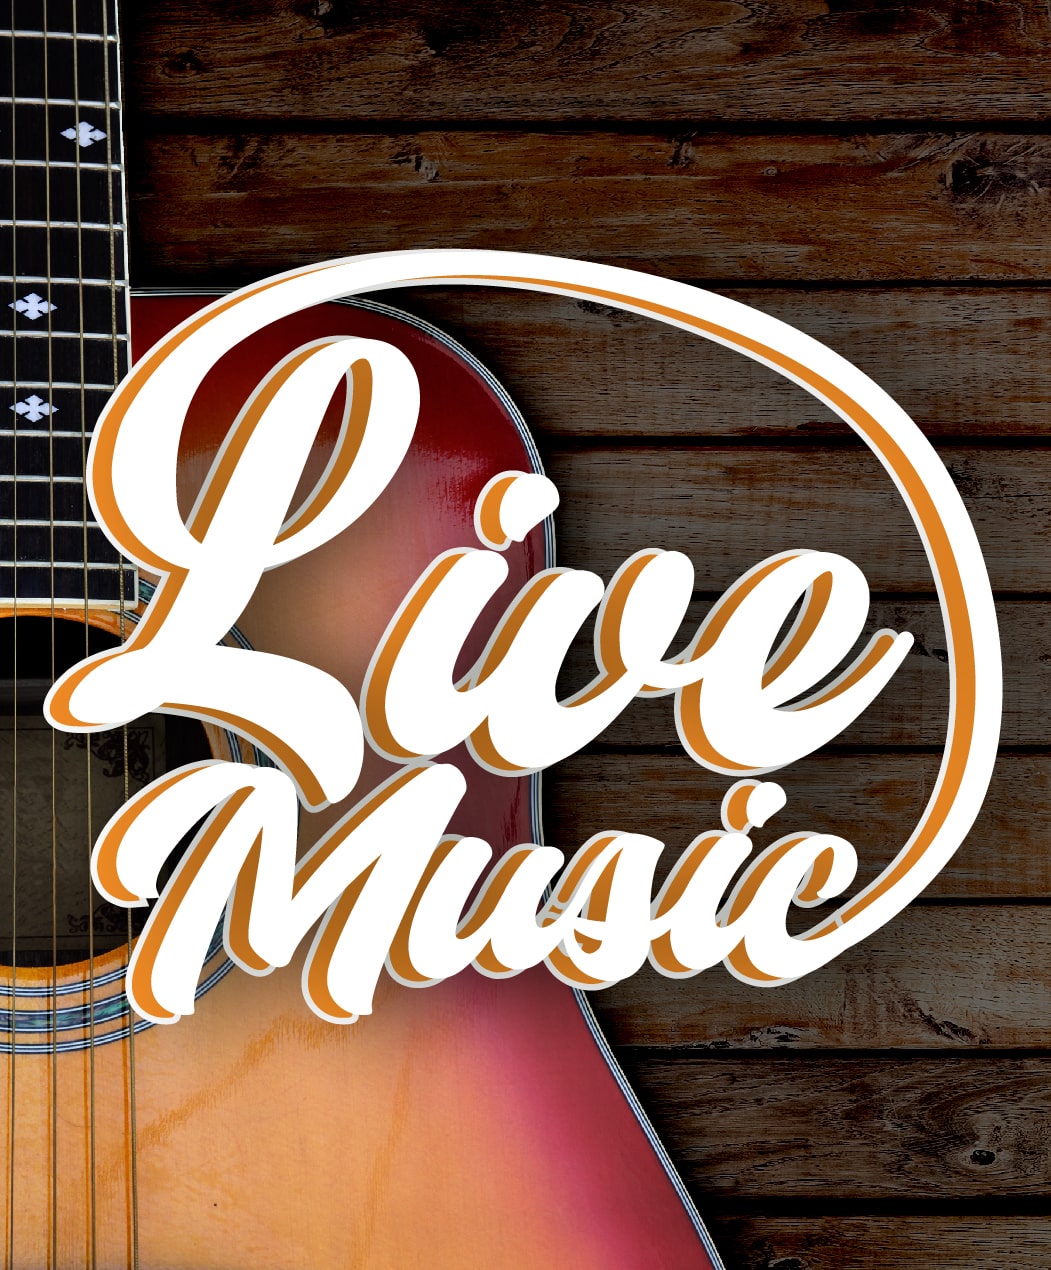 Live Music at Point Place Casino